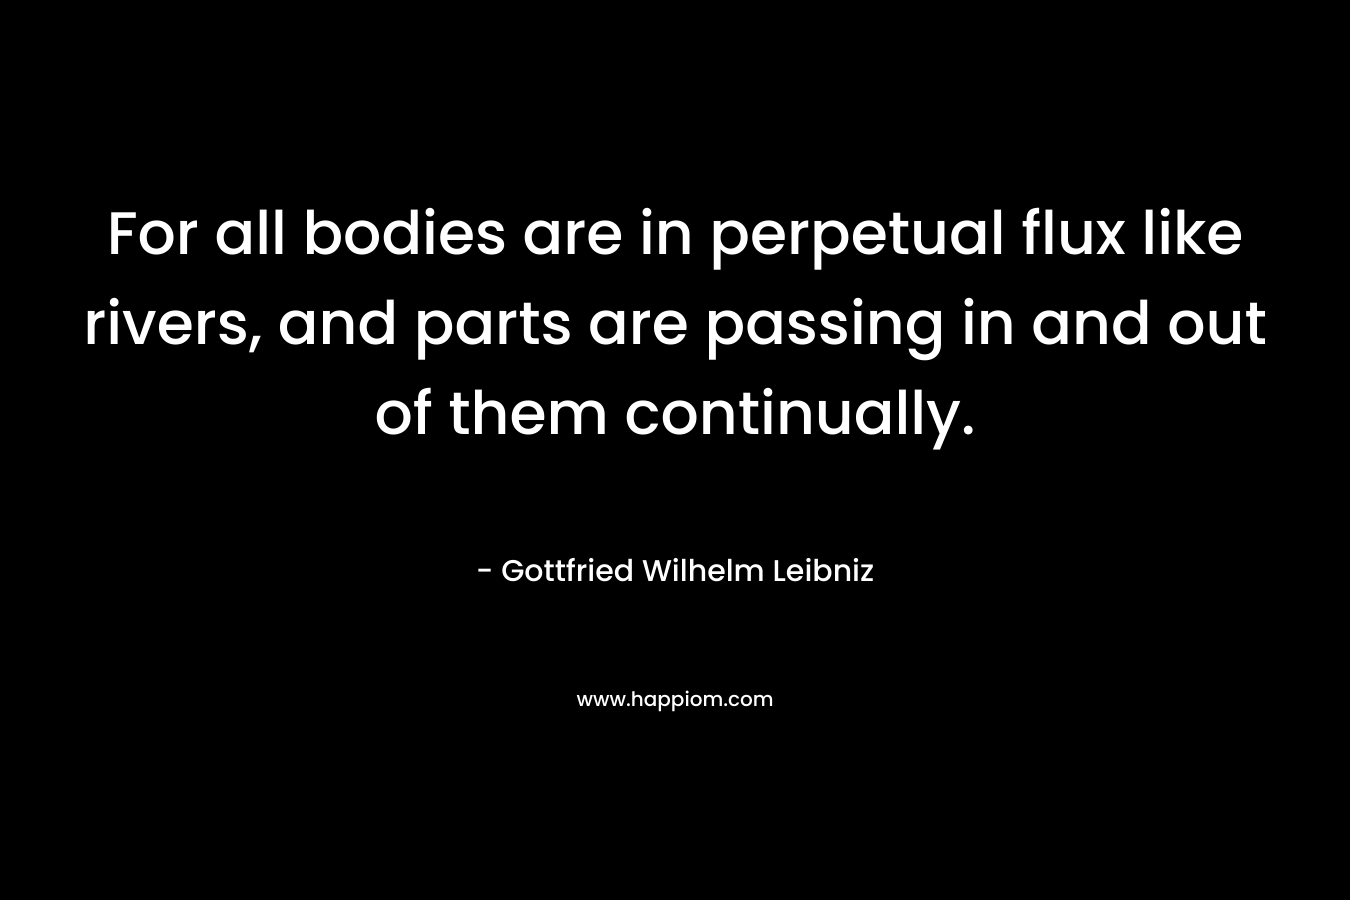 For all bodies are in perpetual flux like rivers, and parts are passing in and out of them continually. – Gottfried Wilhelm Leibniz